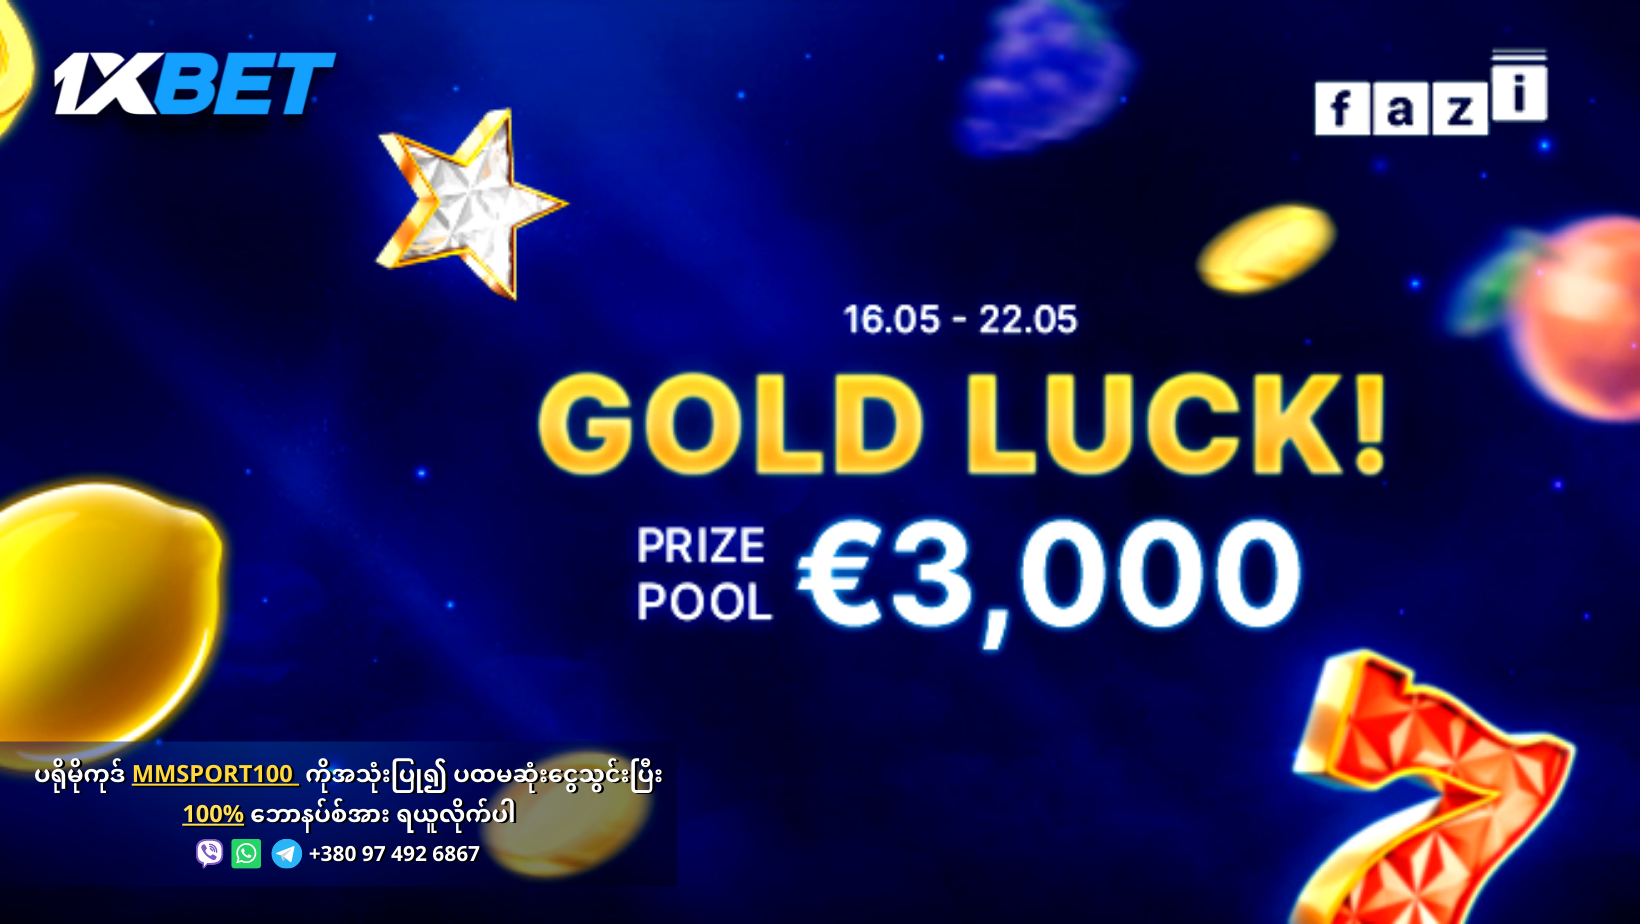 1xBet Gold Luck Promotion